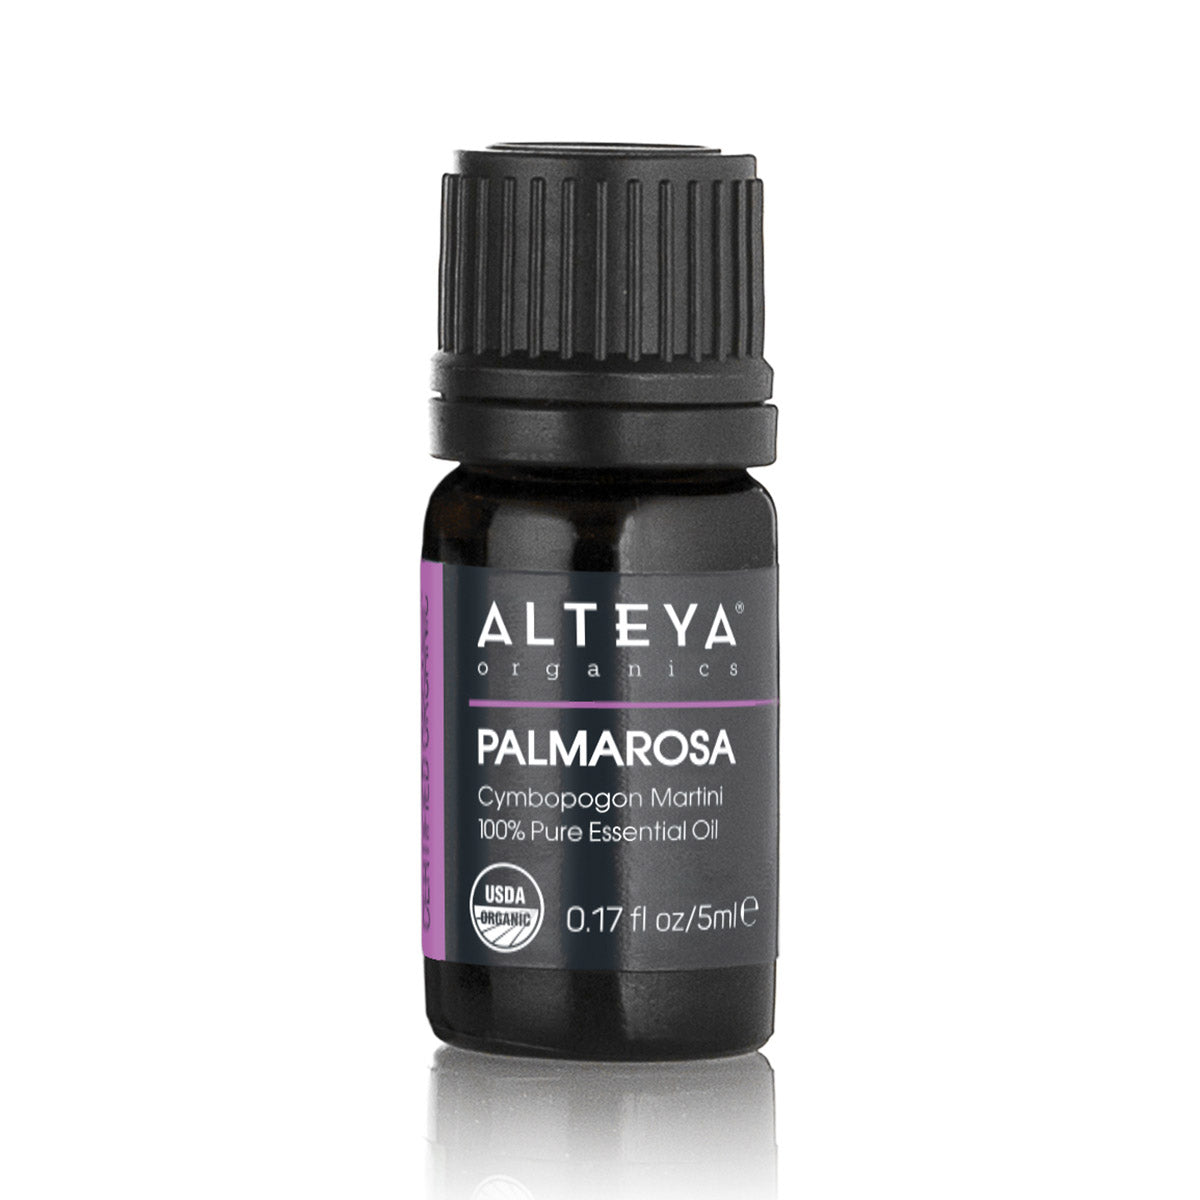 Palmarosa essential oil is extracted from the Cymbopogon Martini plant by steam distillation. Although Cymbopogon Martini belongs to the lemongrass family, palmarosa essential oil has fresh, floral, scent with a resemblance to rose.